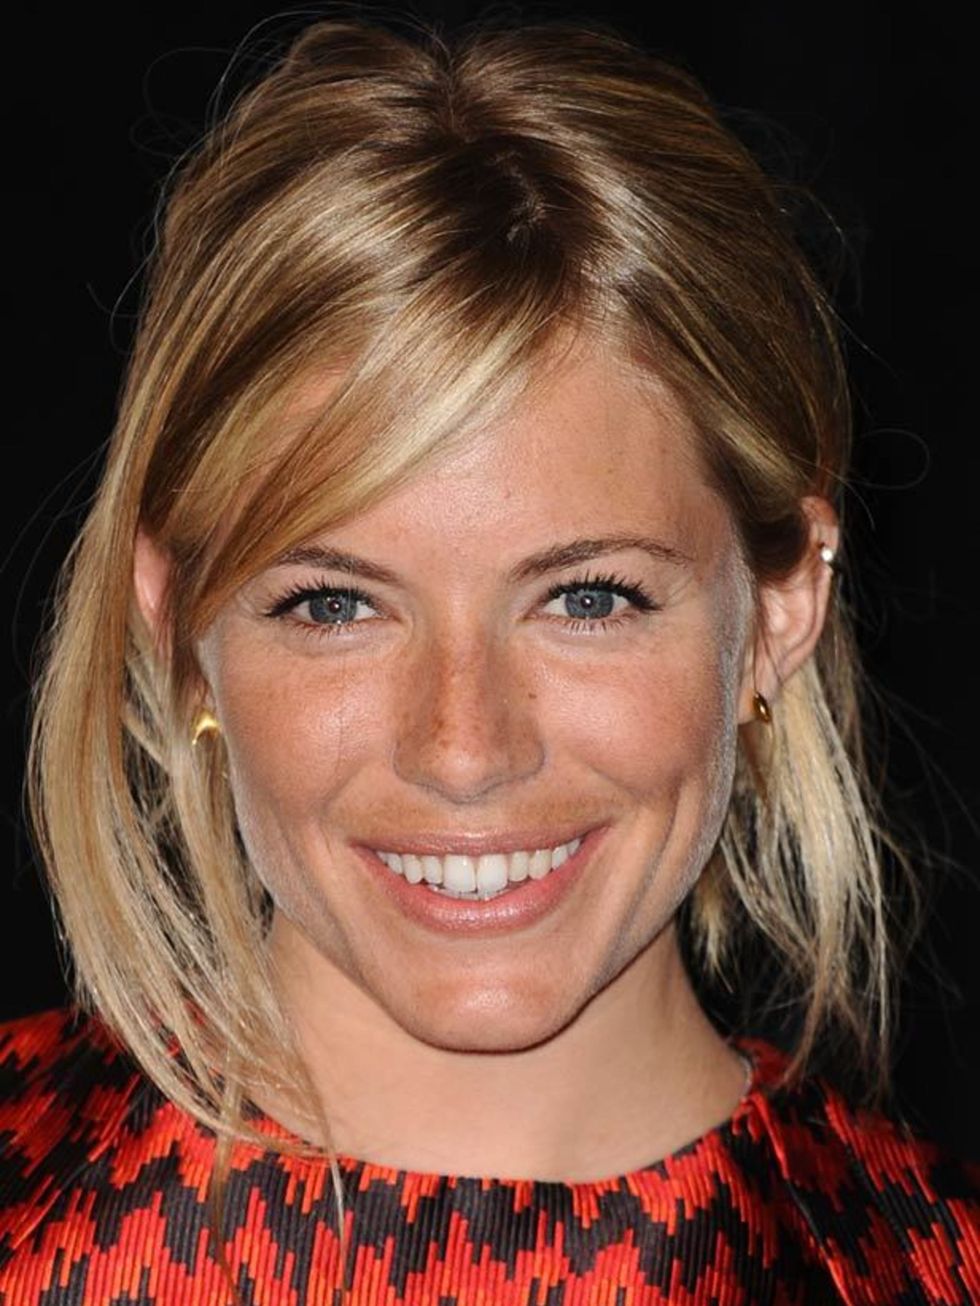 <p><a href="http://www.elleuk.com/beauty/celeb-beauty/celeb-beauty-bags/%28section%29/sienna-miller-favourite-beauty-buys">Click to see Sienna's beauty bag</a></p>